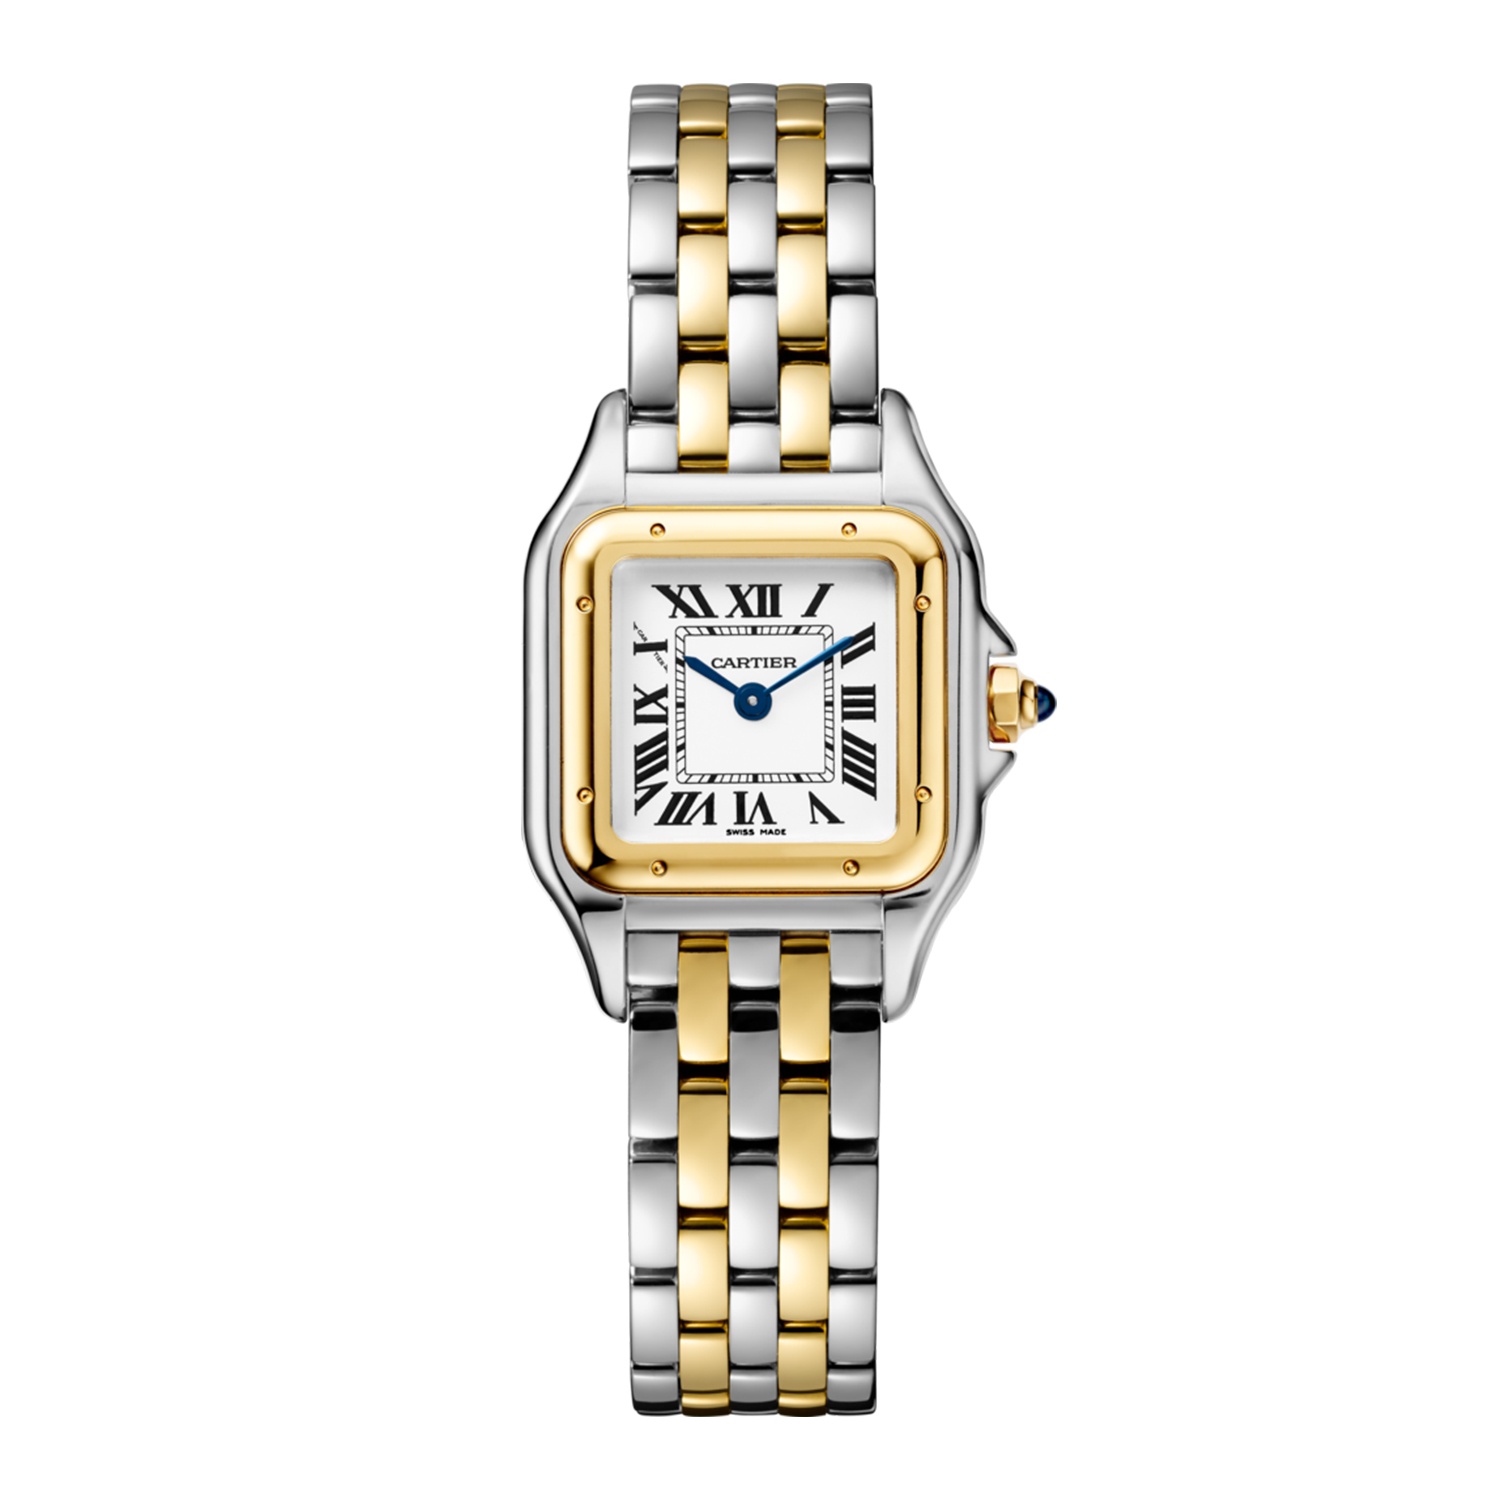 Panthere De Cartier Watch with Stainless Steel and Yellow Gold Bracelet Strap 0